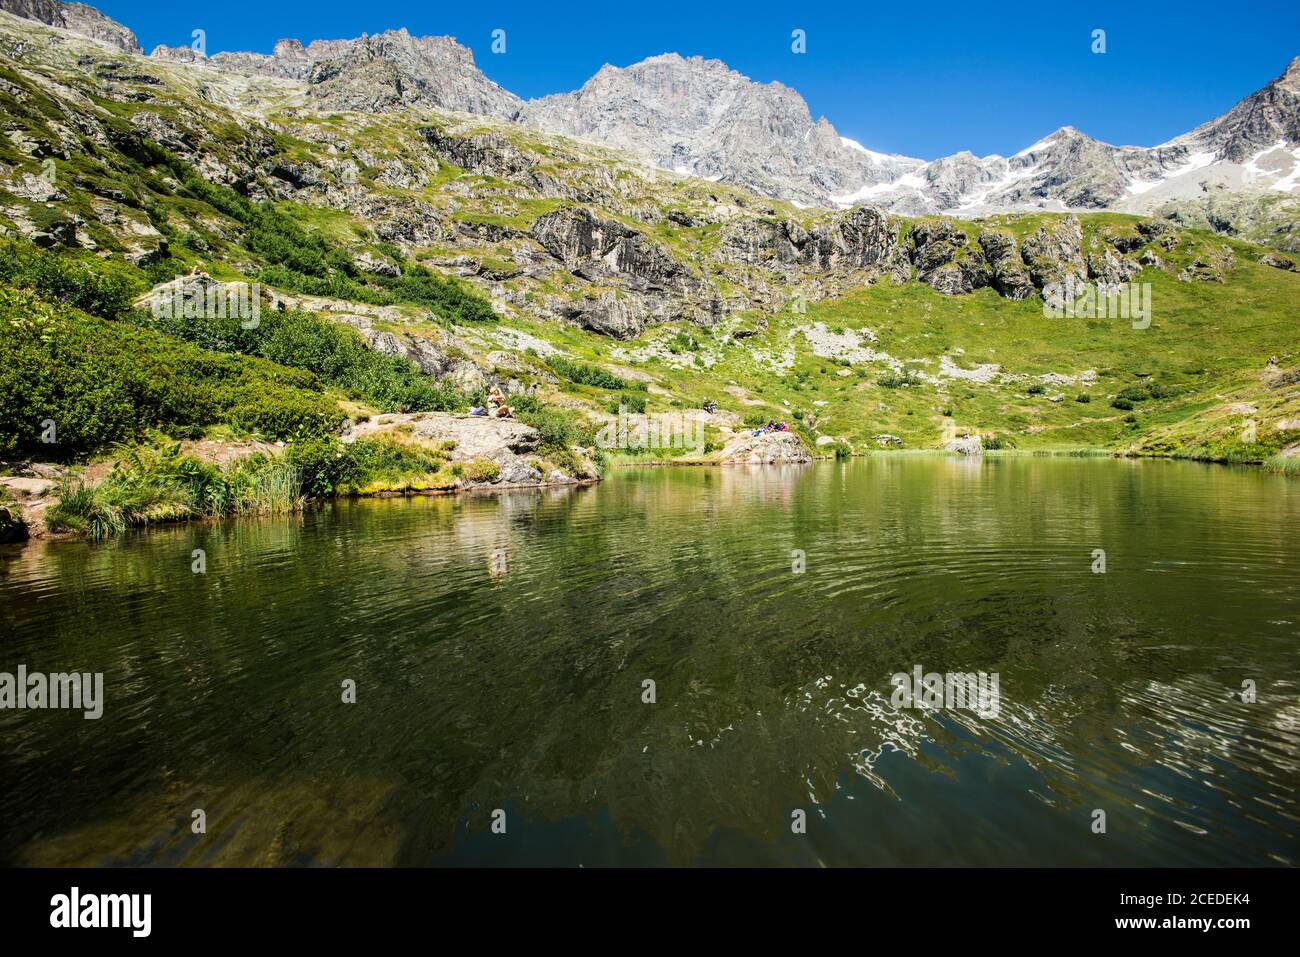 Lauzon Lagoon in the French Alps Stock Photo